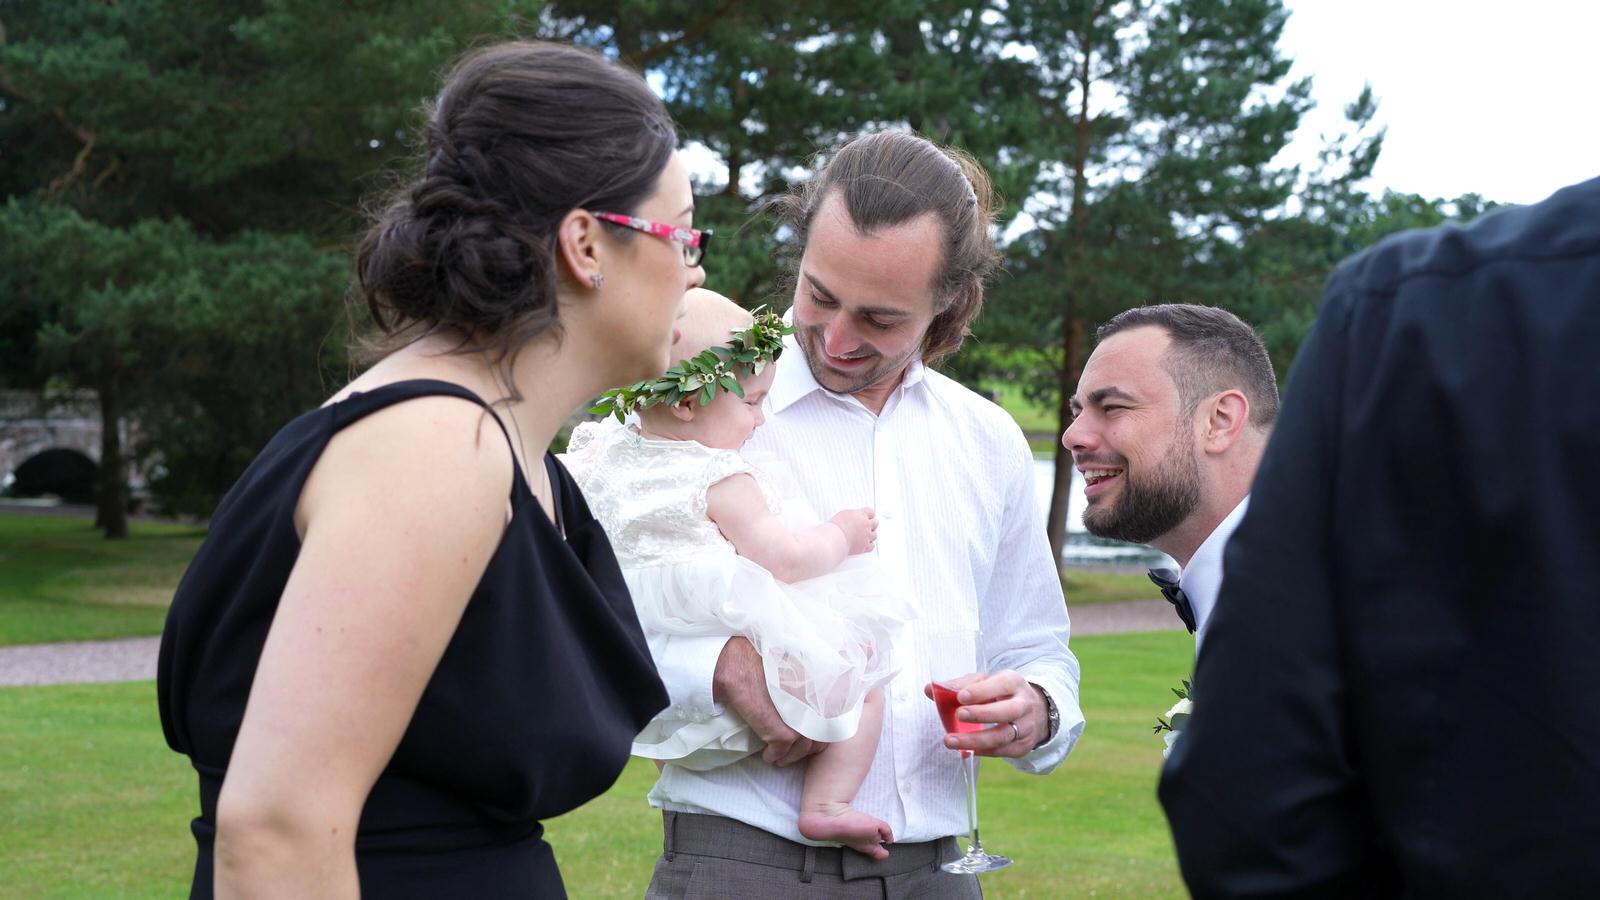 guests fuss over a baby flowergirl